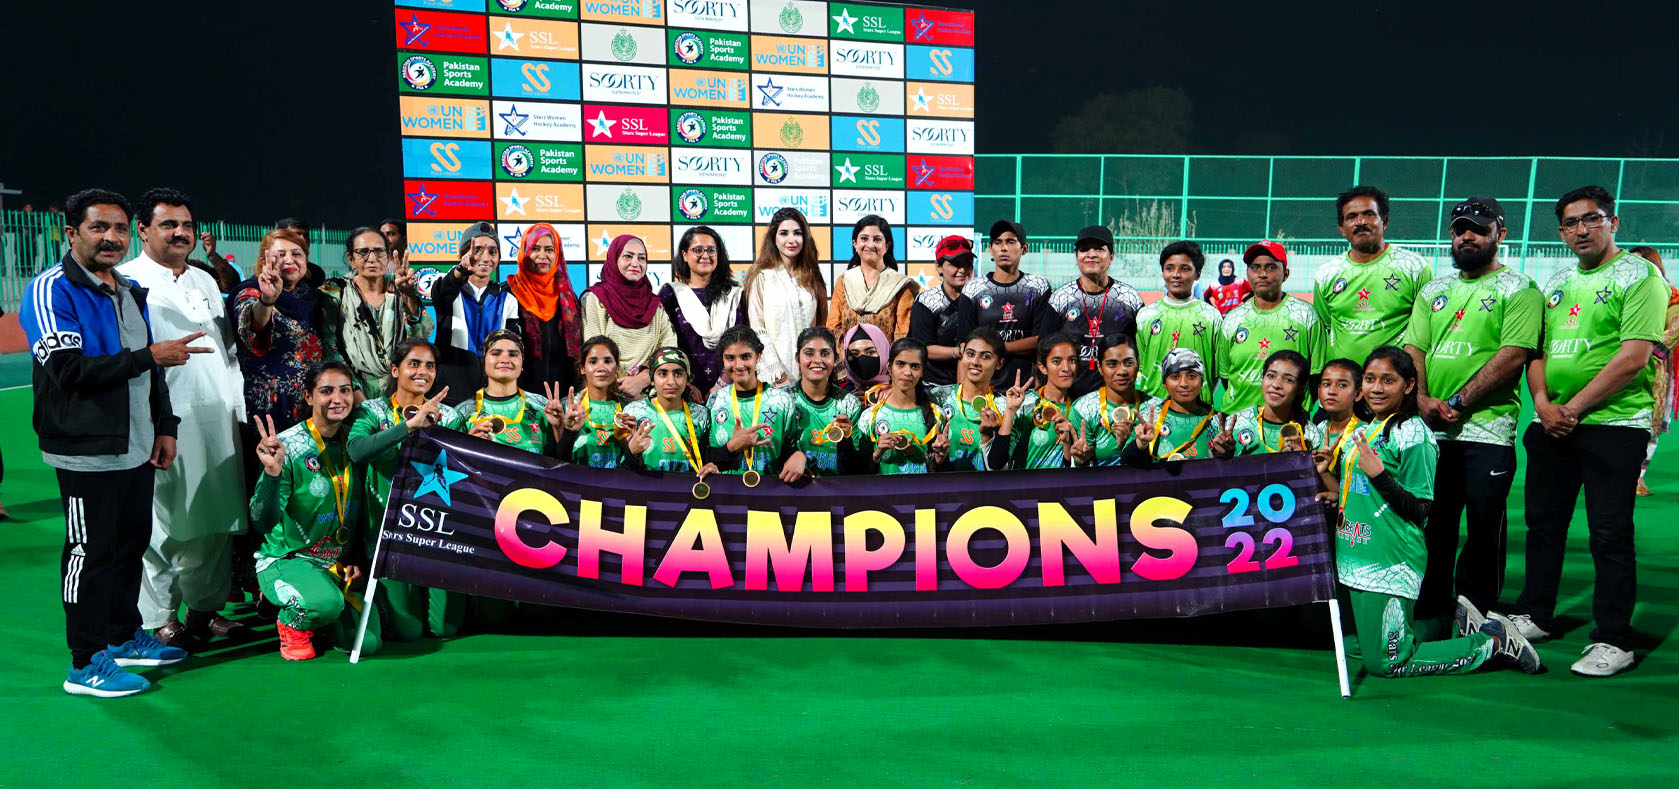 The winning team, from Lahore city, poses at the 12 March 2022 hockey tournament in Sukkur city, Pakistan. Also shown are the tournament organizers, UN Women Team and Soorty Enterprises. Photo: UN Women/Hassan Ali Abbasi